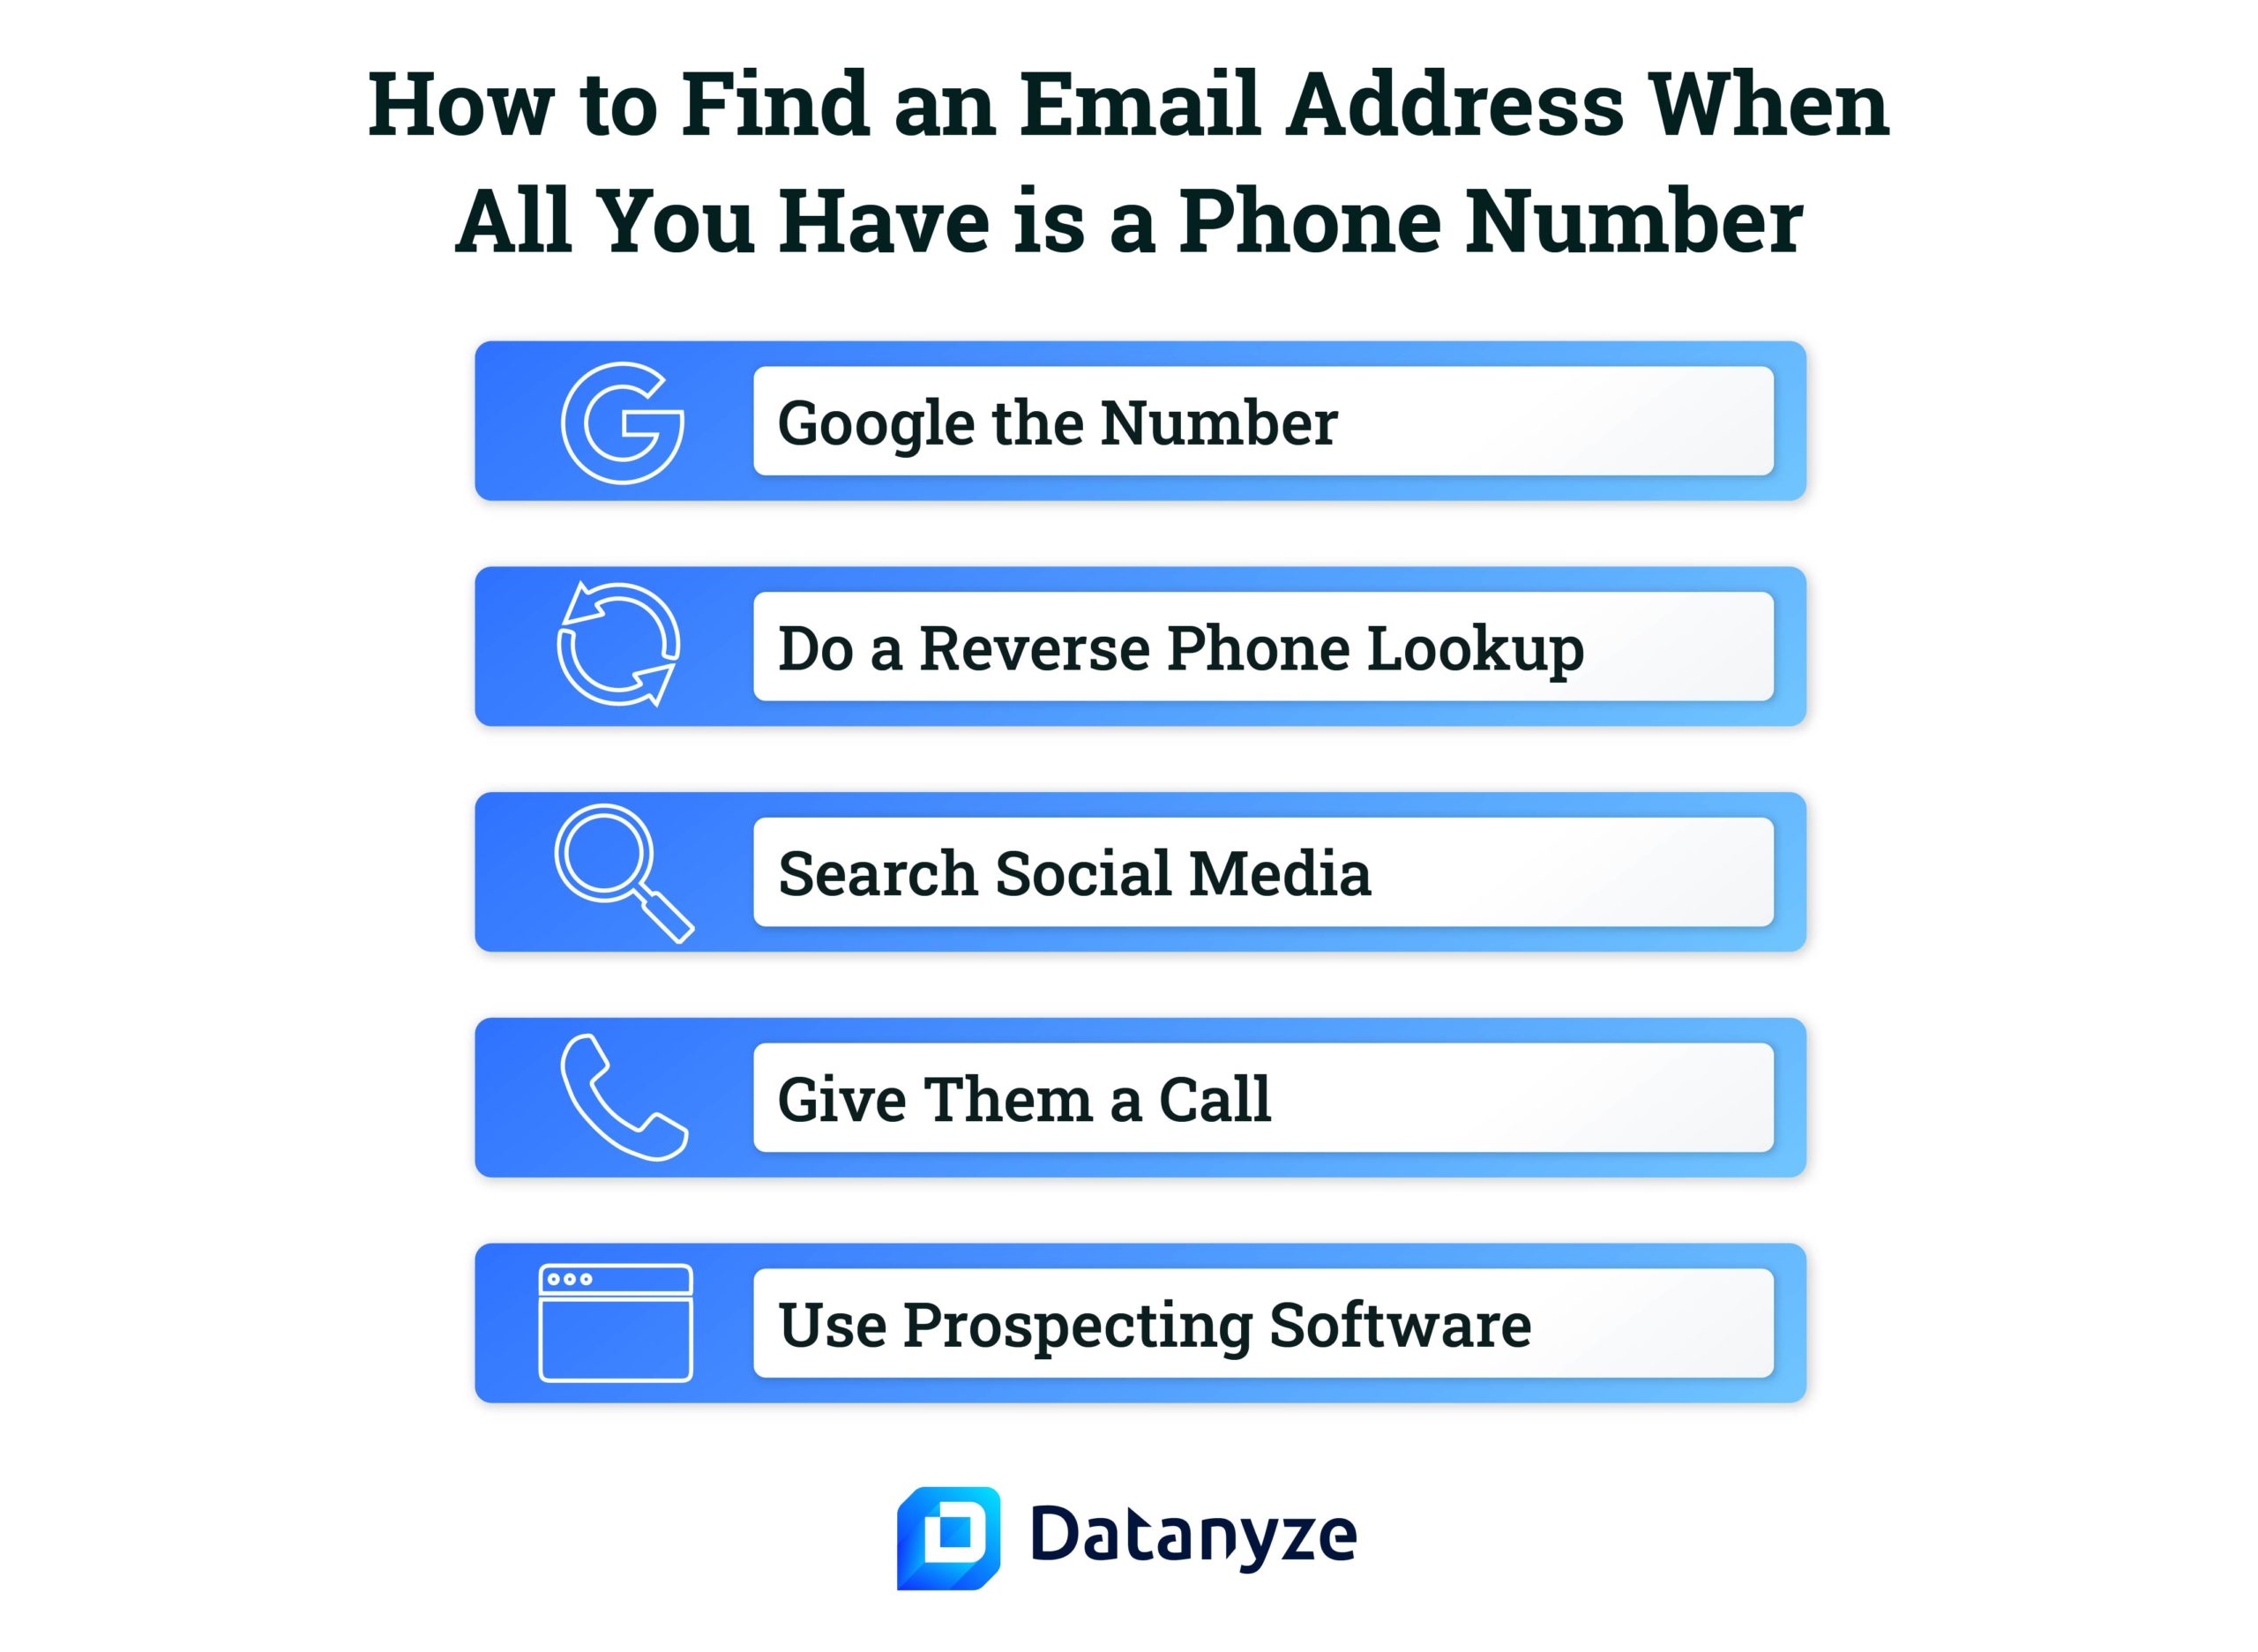 How to Find an Email Address by Phone Number